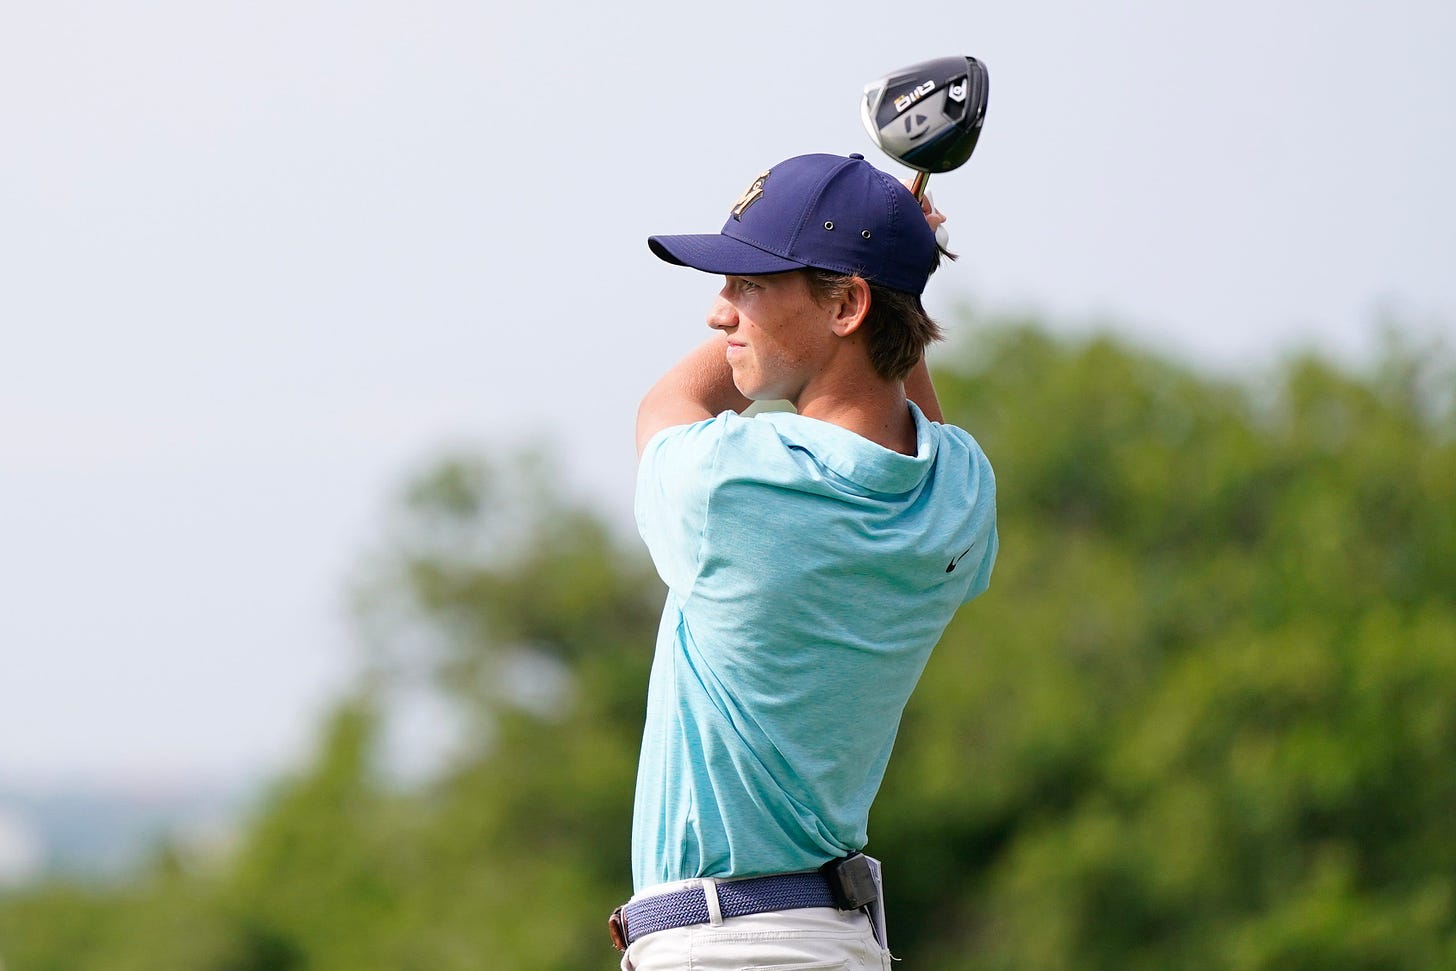 Miles Russell, 15, to make PGA Tour debut at Rocket Mortgage Classic